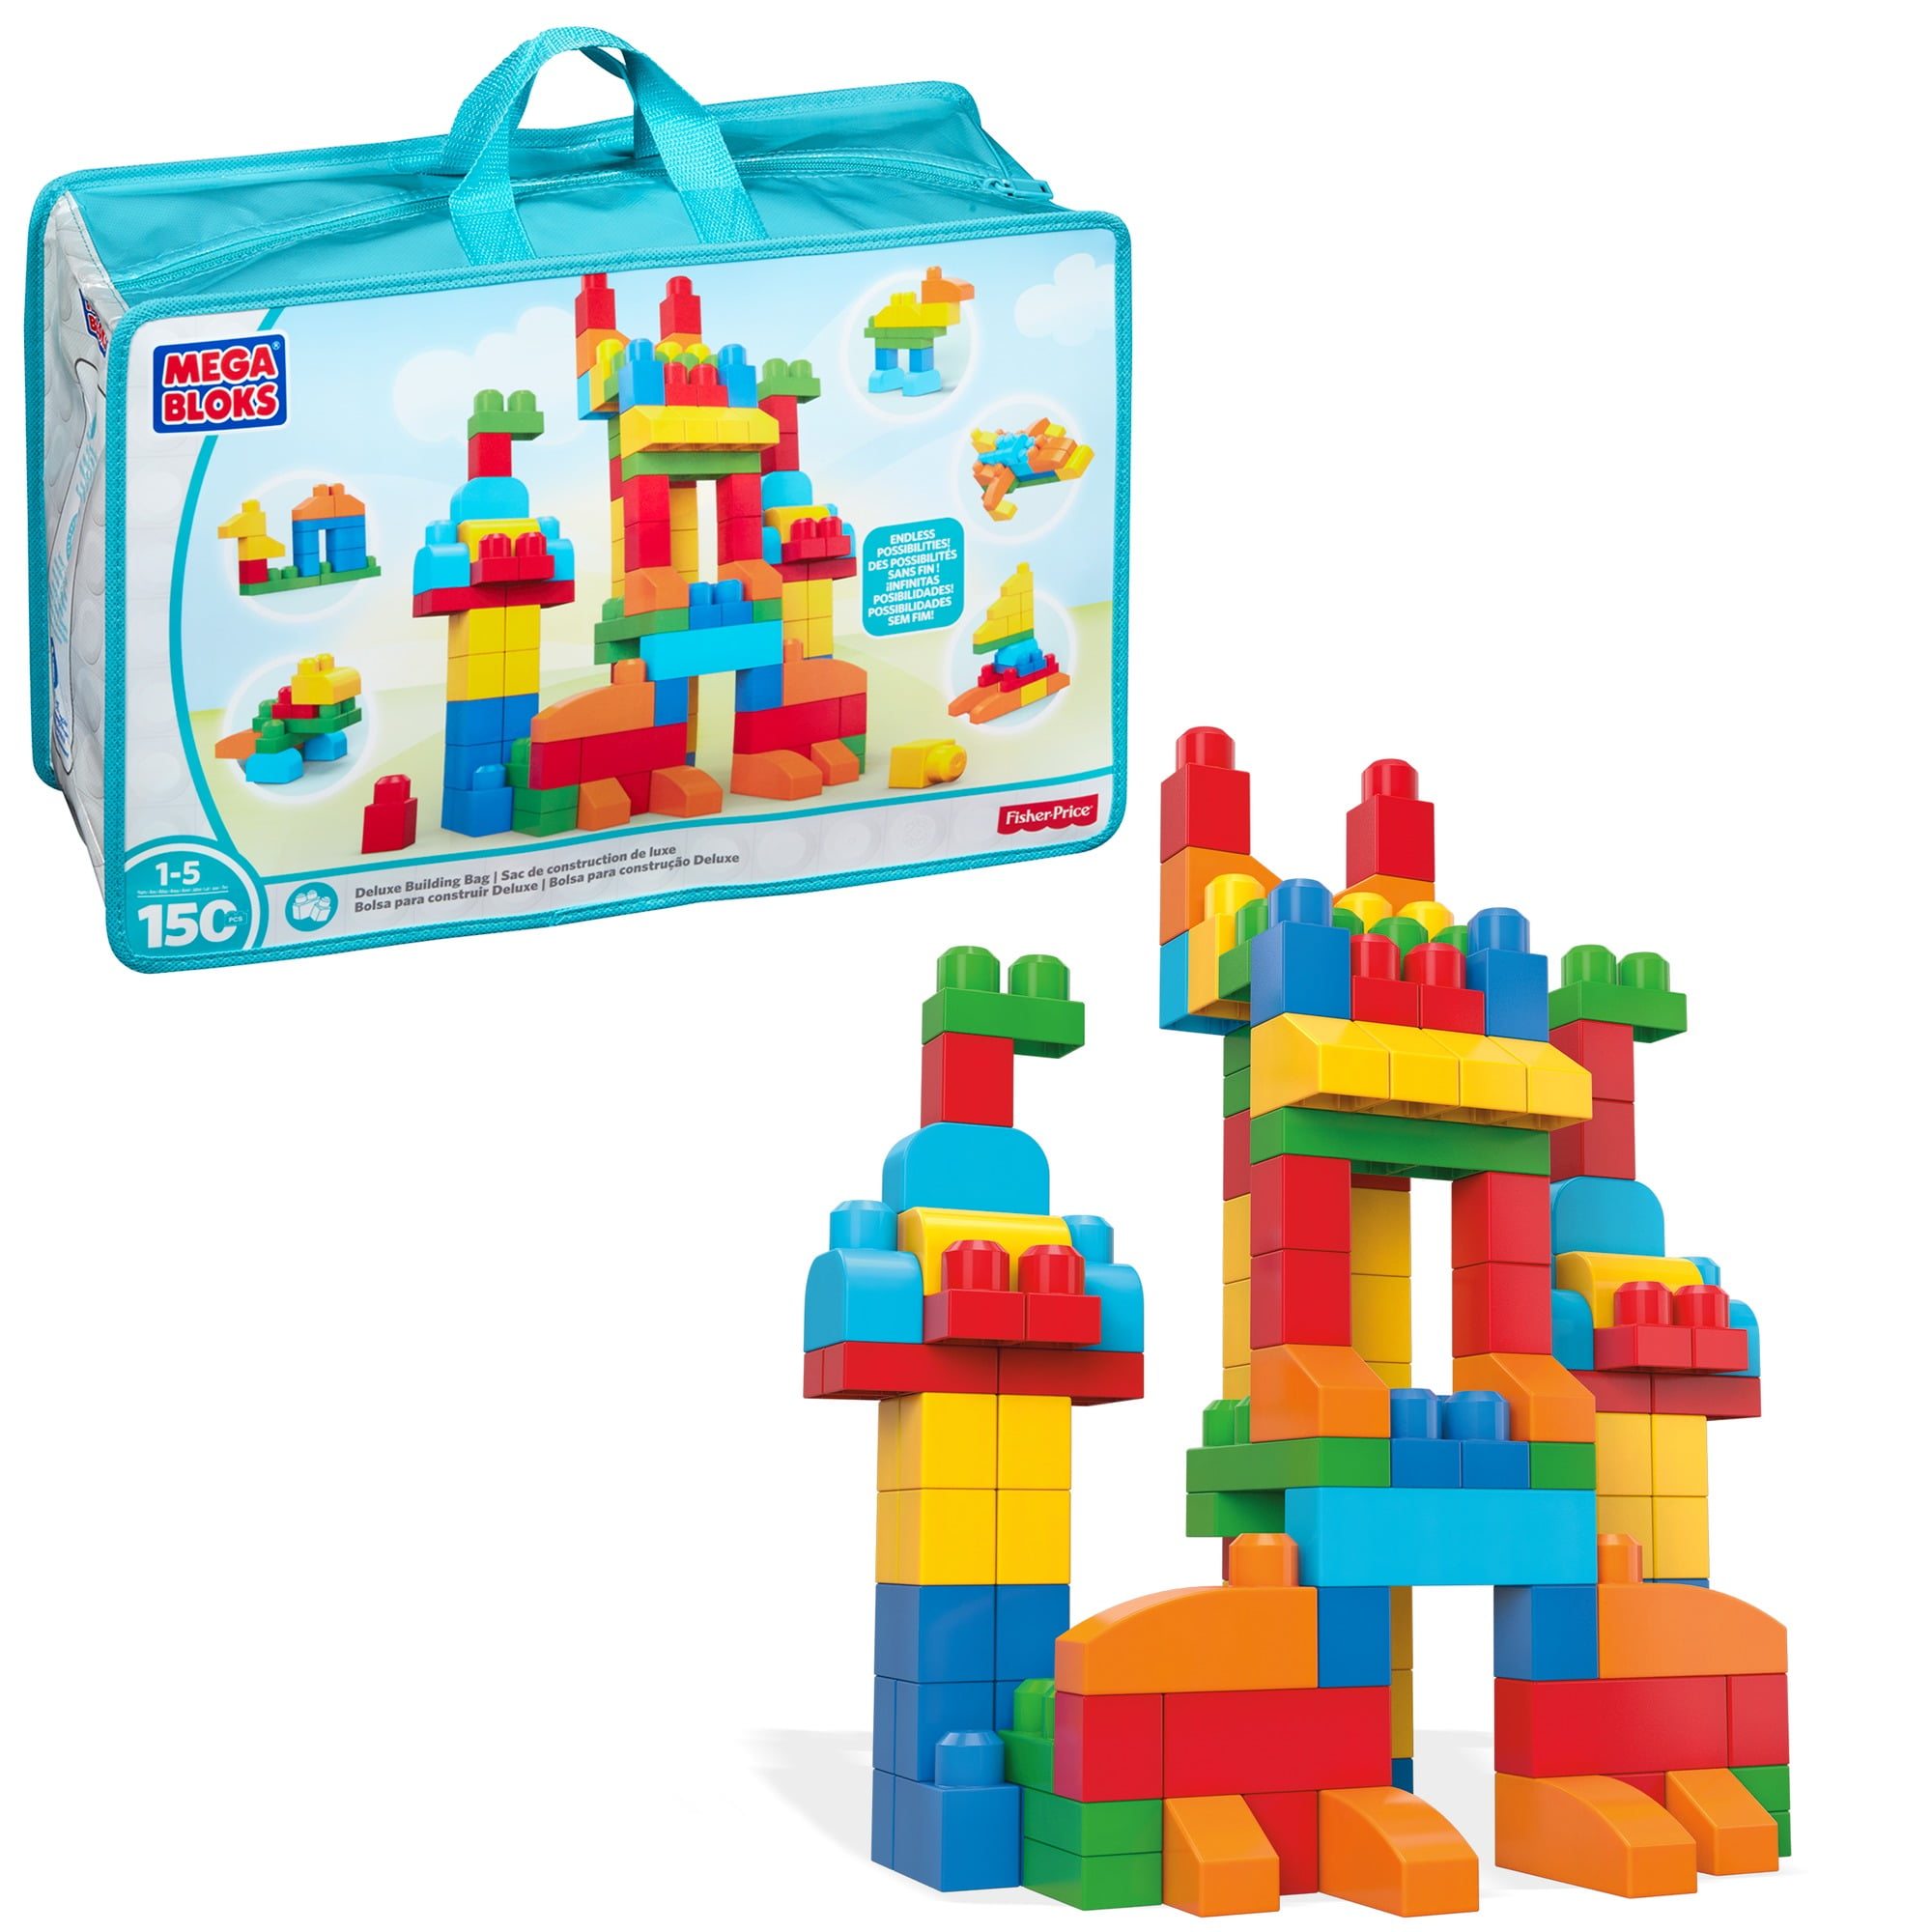 3 MEGA Bloks 40 Piece Bags Just Build Red Blue Yello for sale online 